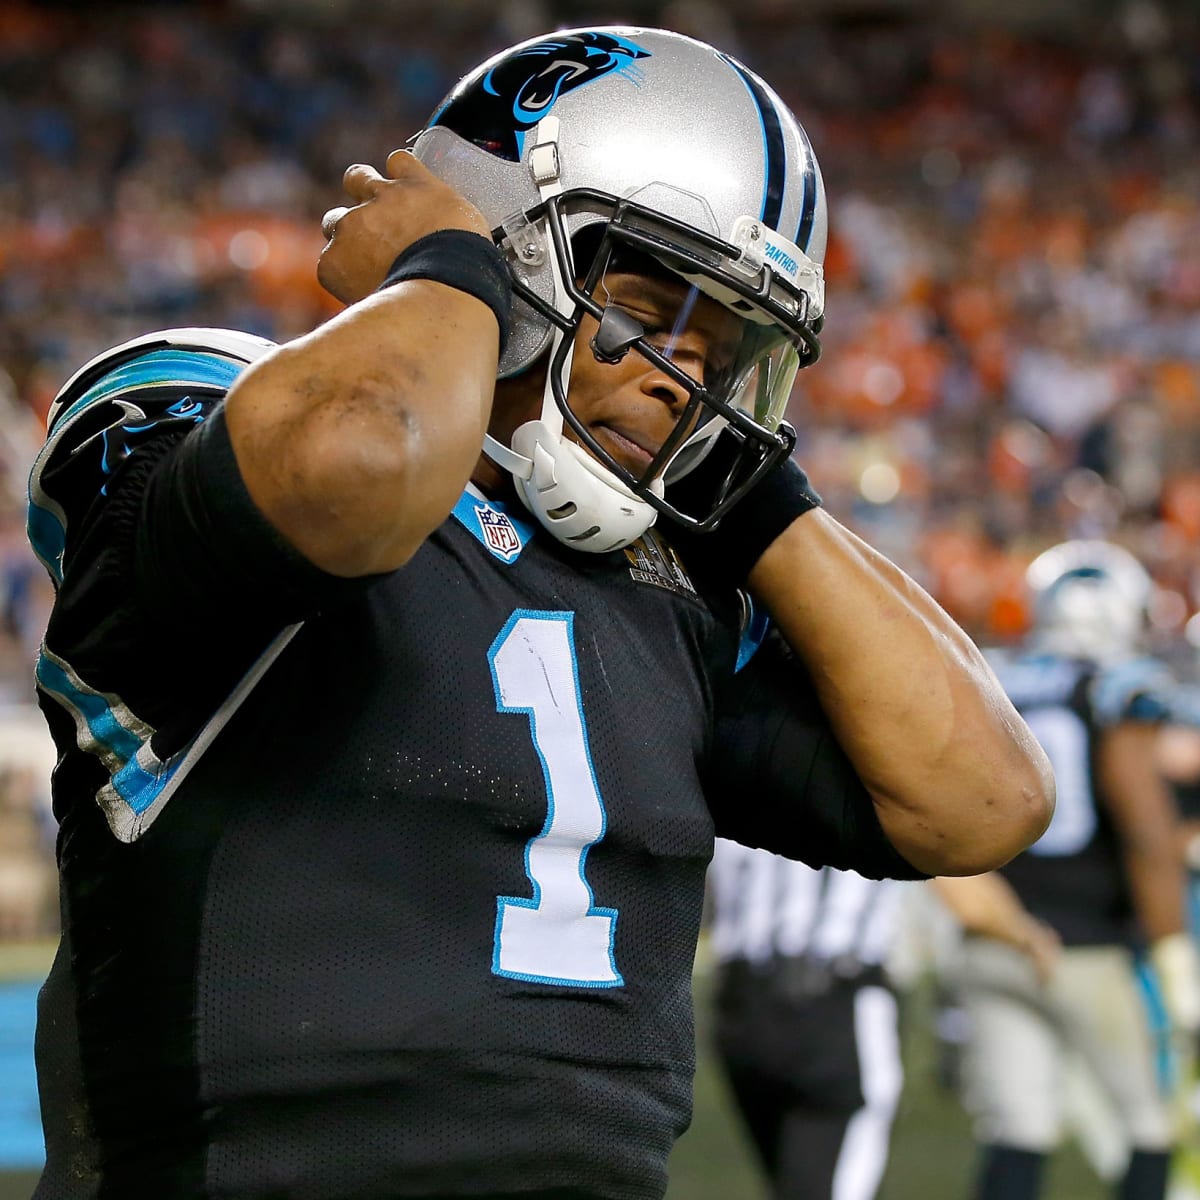 Cam Newton struggles in 1st Super Bowl, Panthers lose 24-10